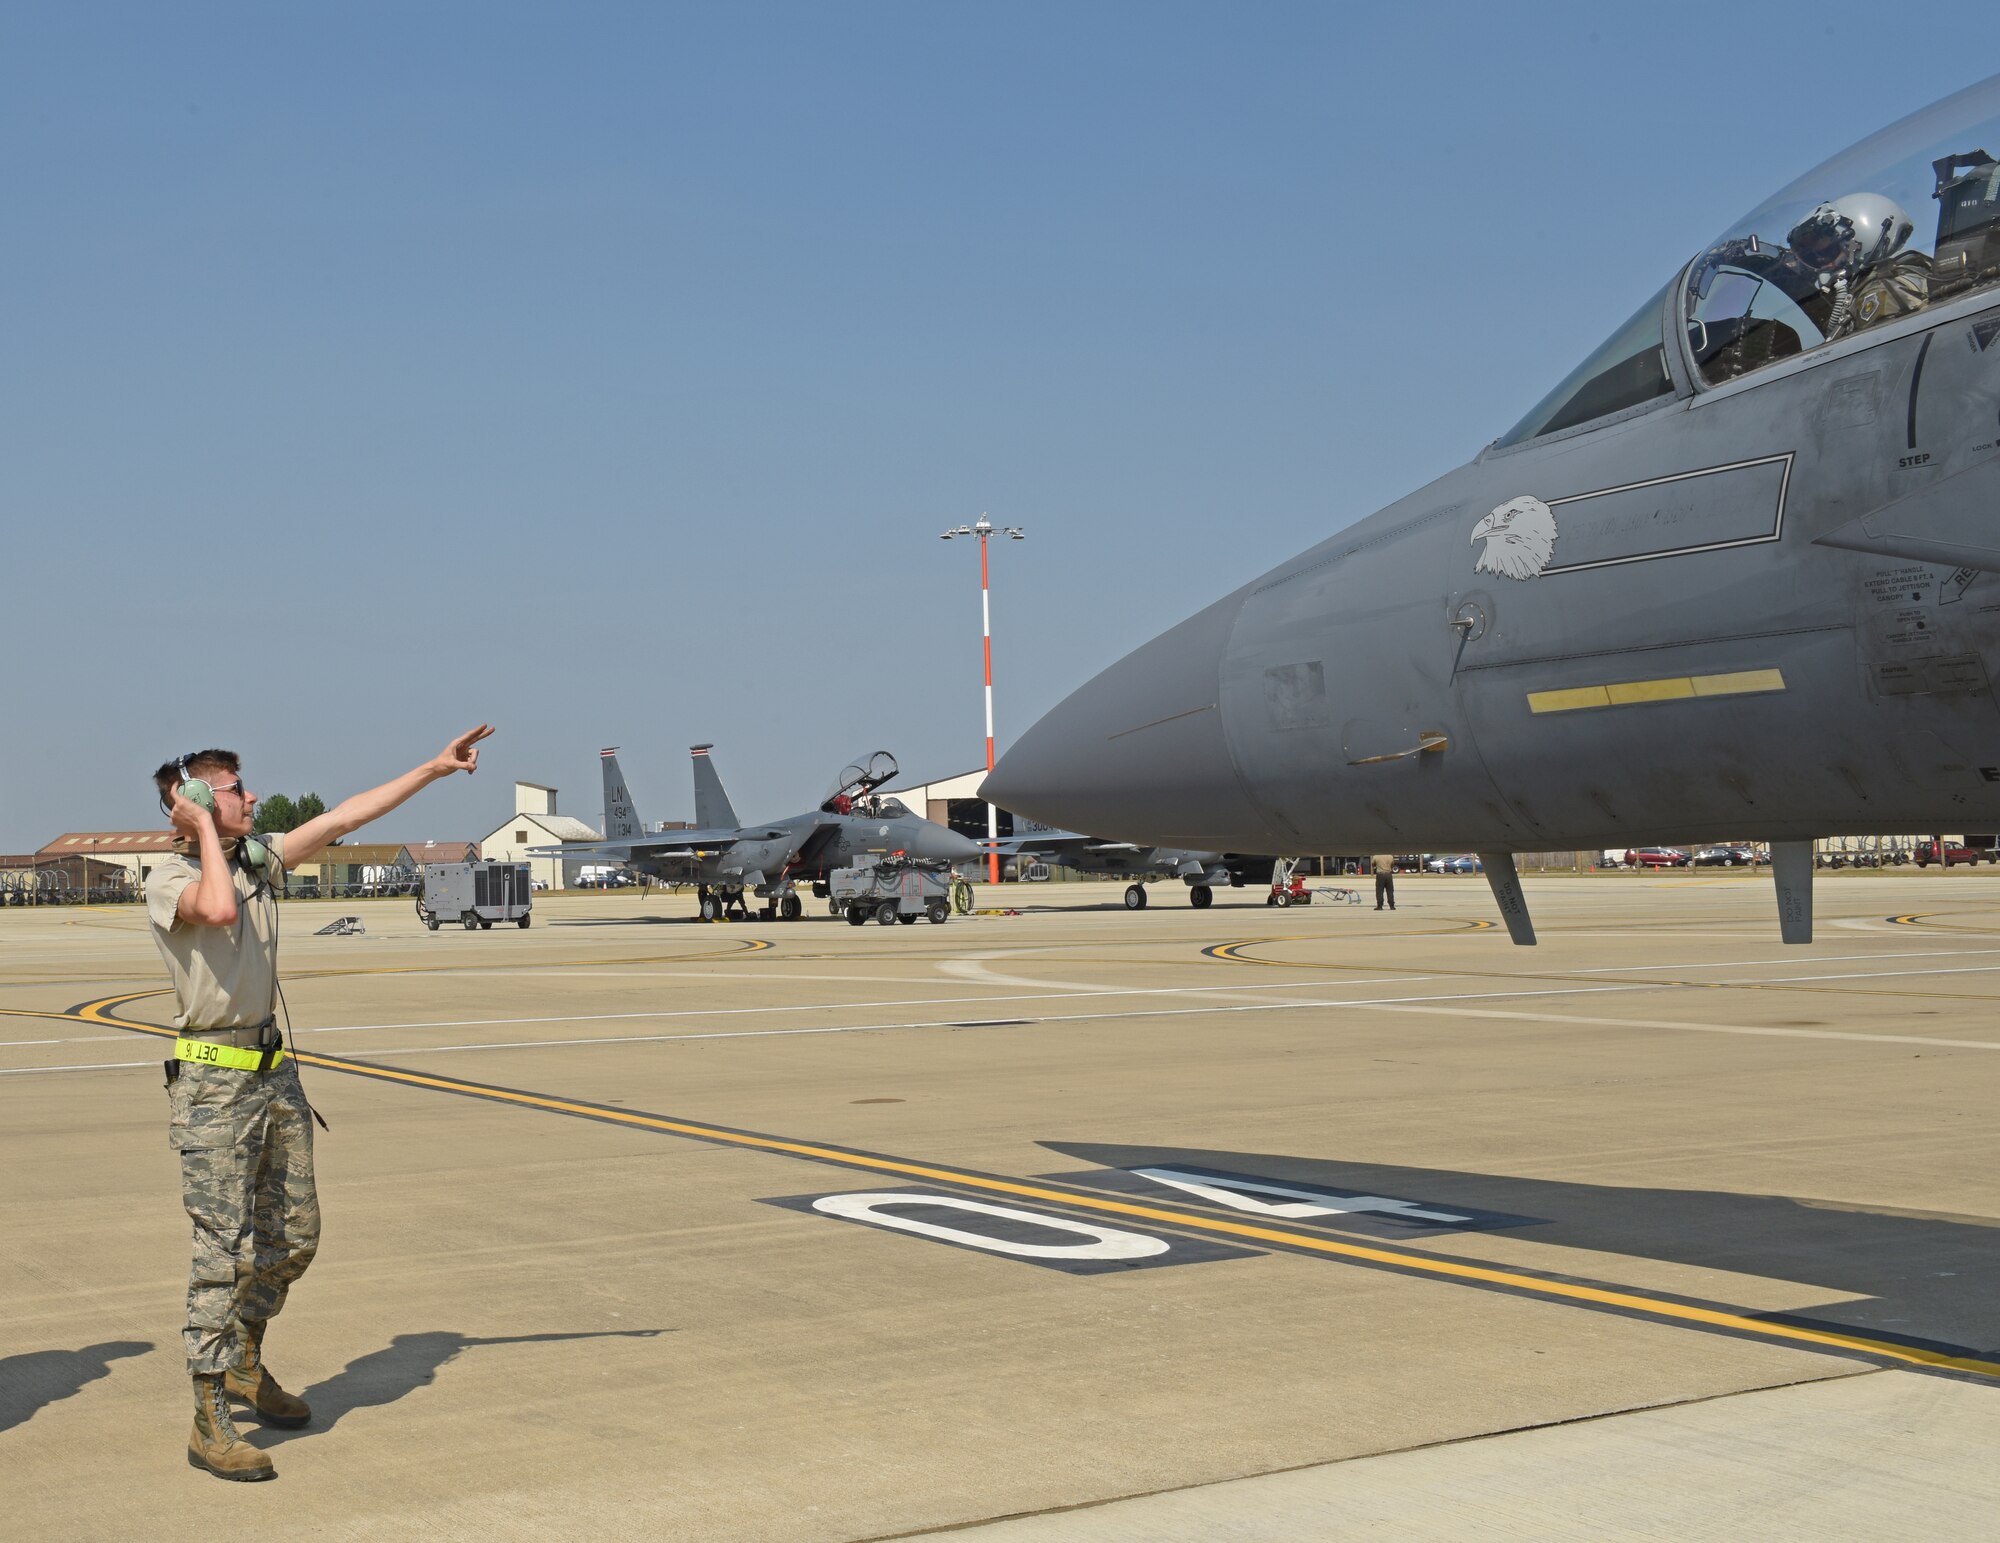 A 48th Fighter Wing crew chief marshalls an F-15E Strike Eagle onto a newly expanded parking ramp at Royal Air Force Lakenheath, England, Aug. 12, 2020. The ramp consolidates F-15E Strike Eagle operations for the two squadrons, shortens transit times and maintenance operations, and improves mission efficiency. (U.S. Air Force photo by Airman 1st Class Rhonda Smith)